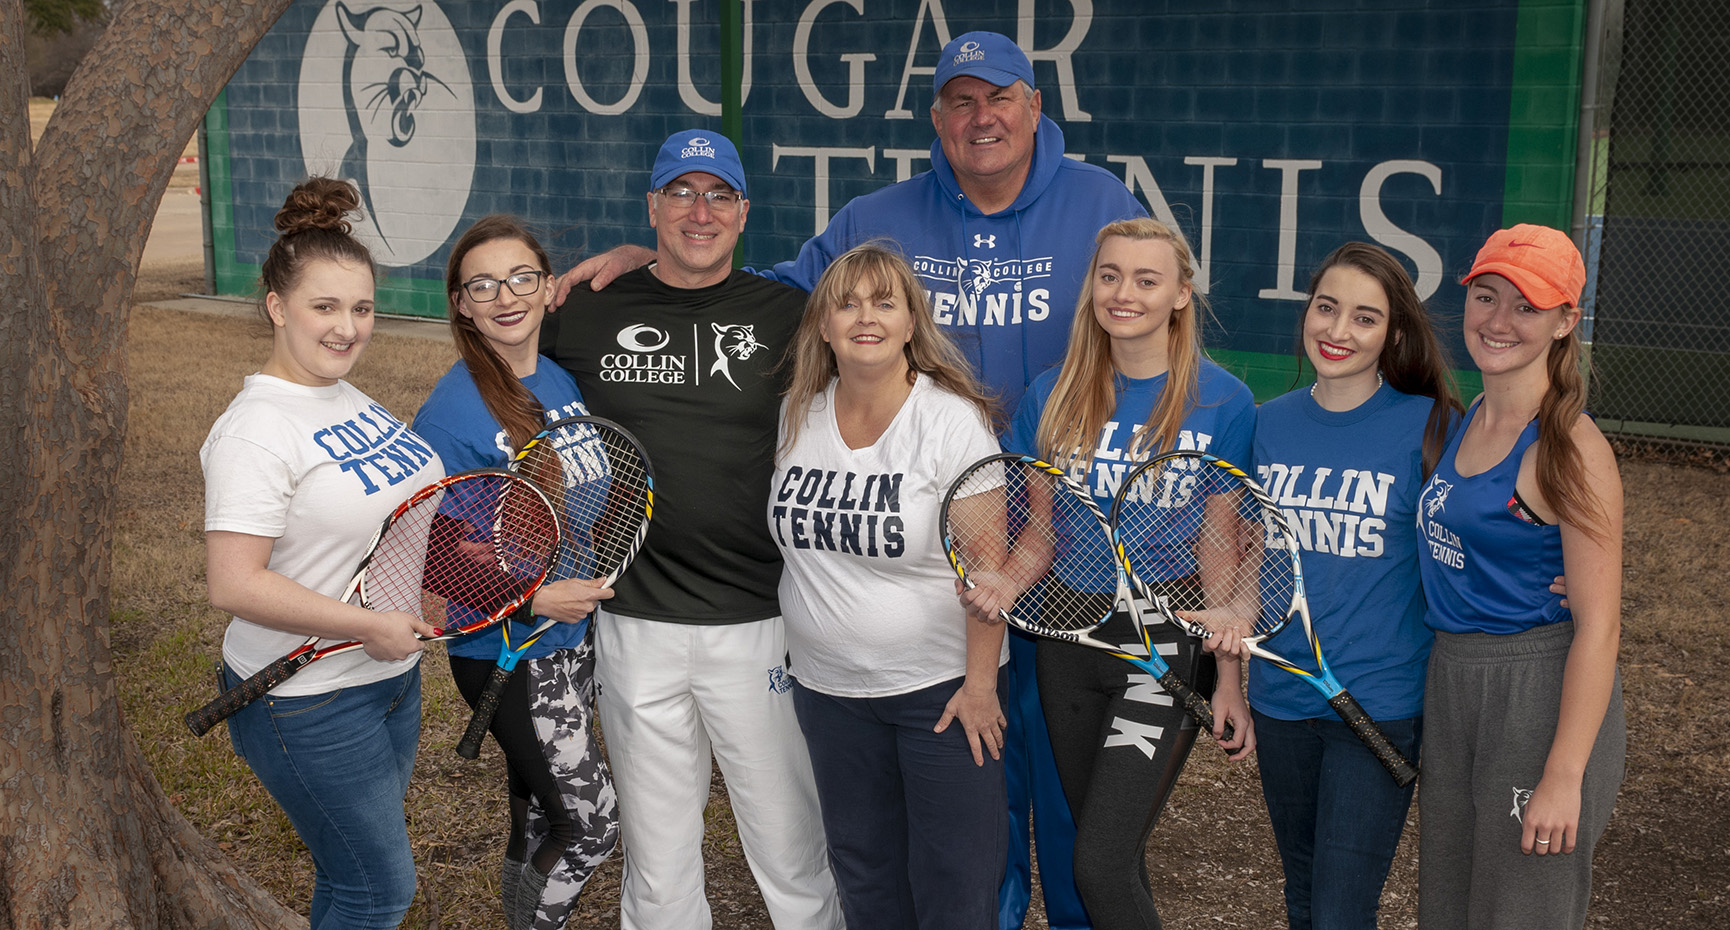 Coach Marty Berryman, center, stands with the Clark family, five members of which played for and earned associate degrees at Collin College. Left to right, Sharon Clark-Heil, Lauren Clark-Justesen, Paul Clark (Father), Melissa Clark (Mother), Berryman, Rachel Clark, Mary Clark, and Rebekah Clark.